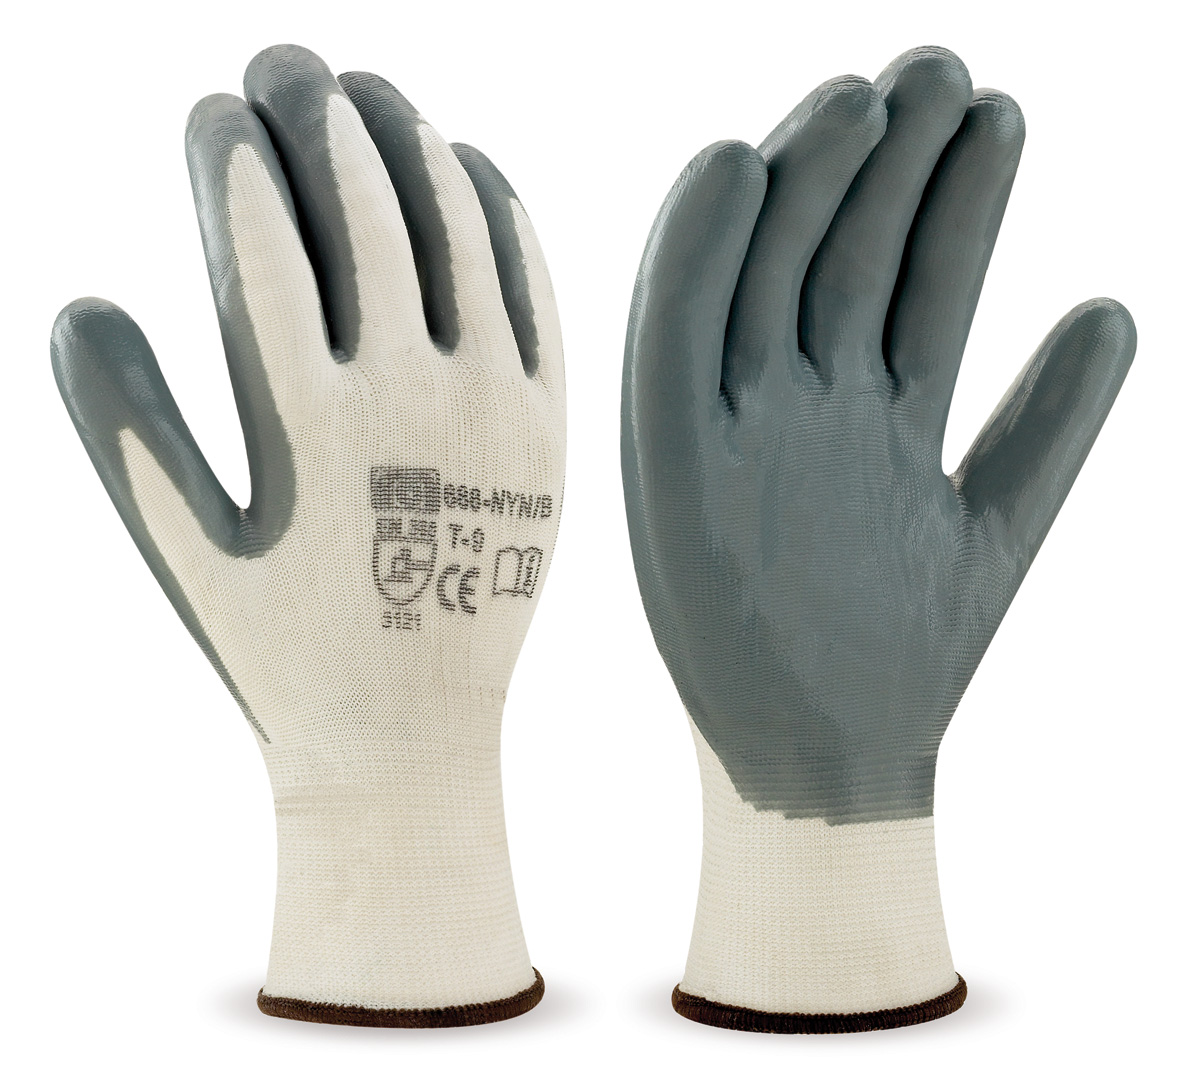 688-NYN/B Work Gloves Nylon White polyester glove with grey nitrile coating.